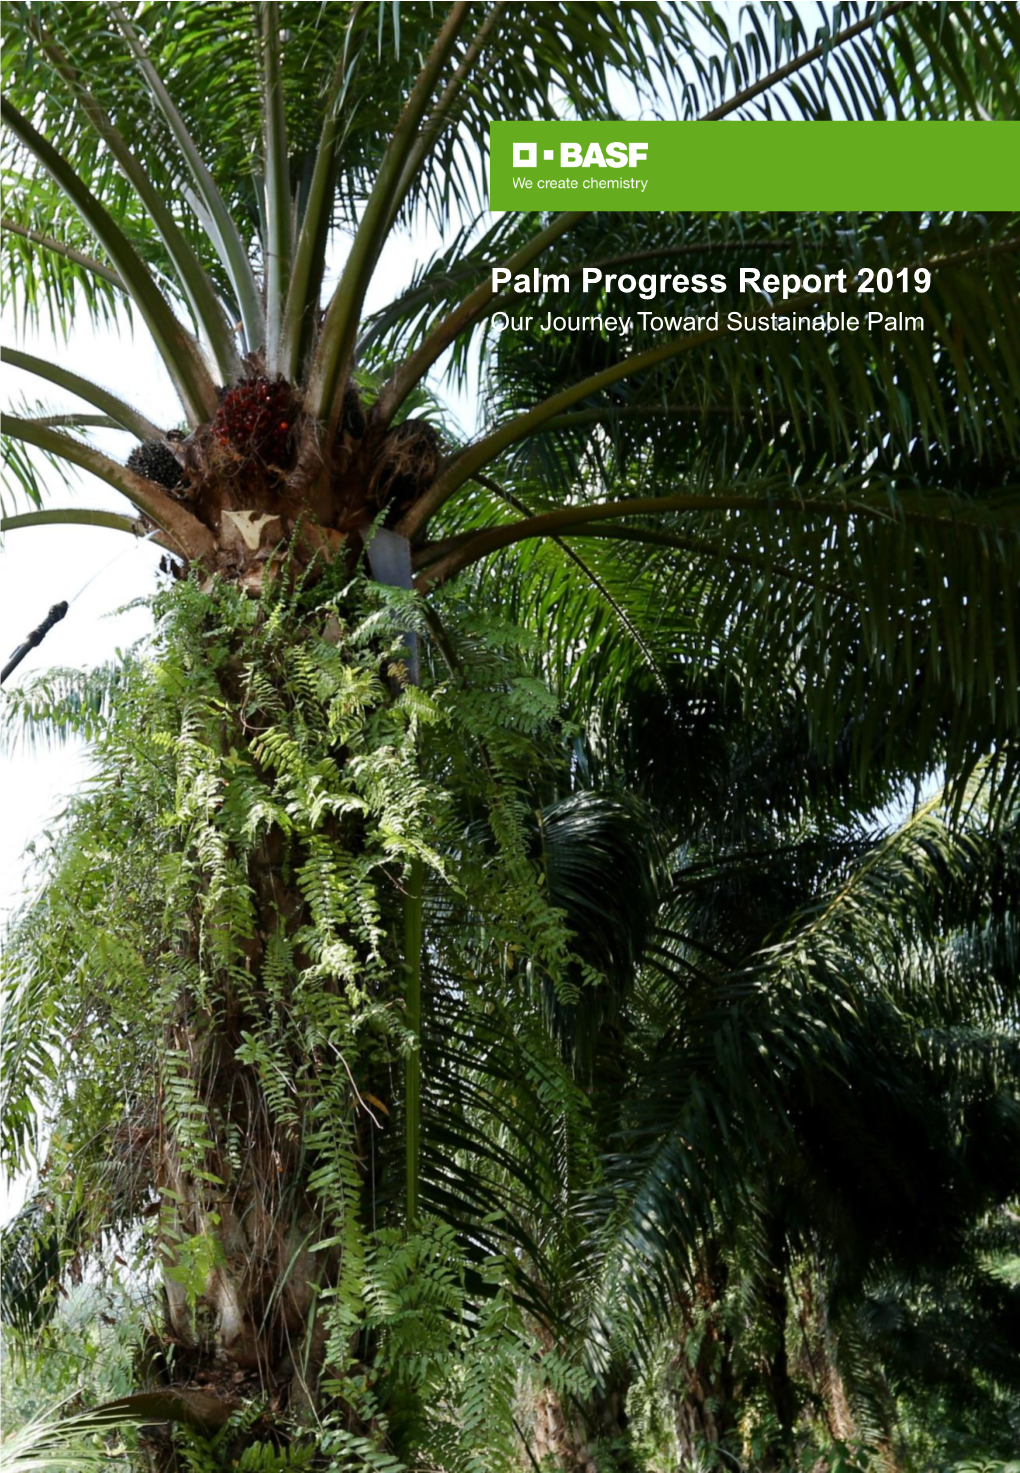 Palm Progress Report 2019 Our Journey Toward Sustainable Palm Letter to Our Stakeholders